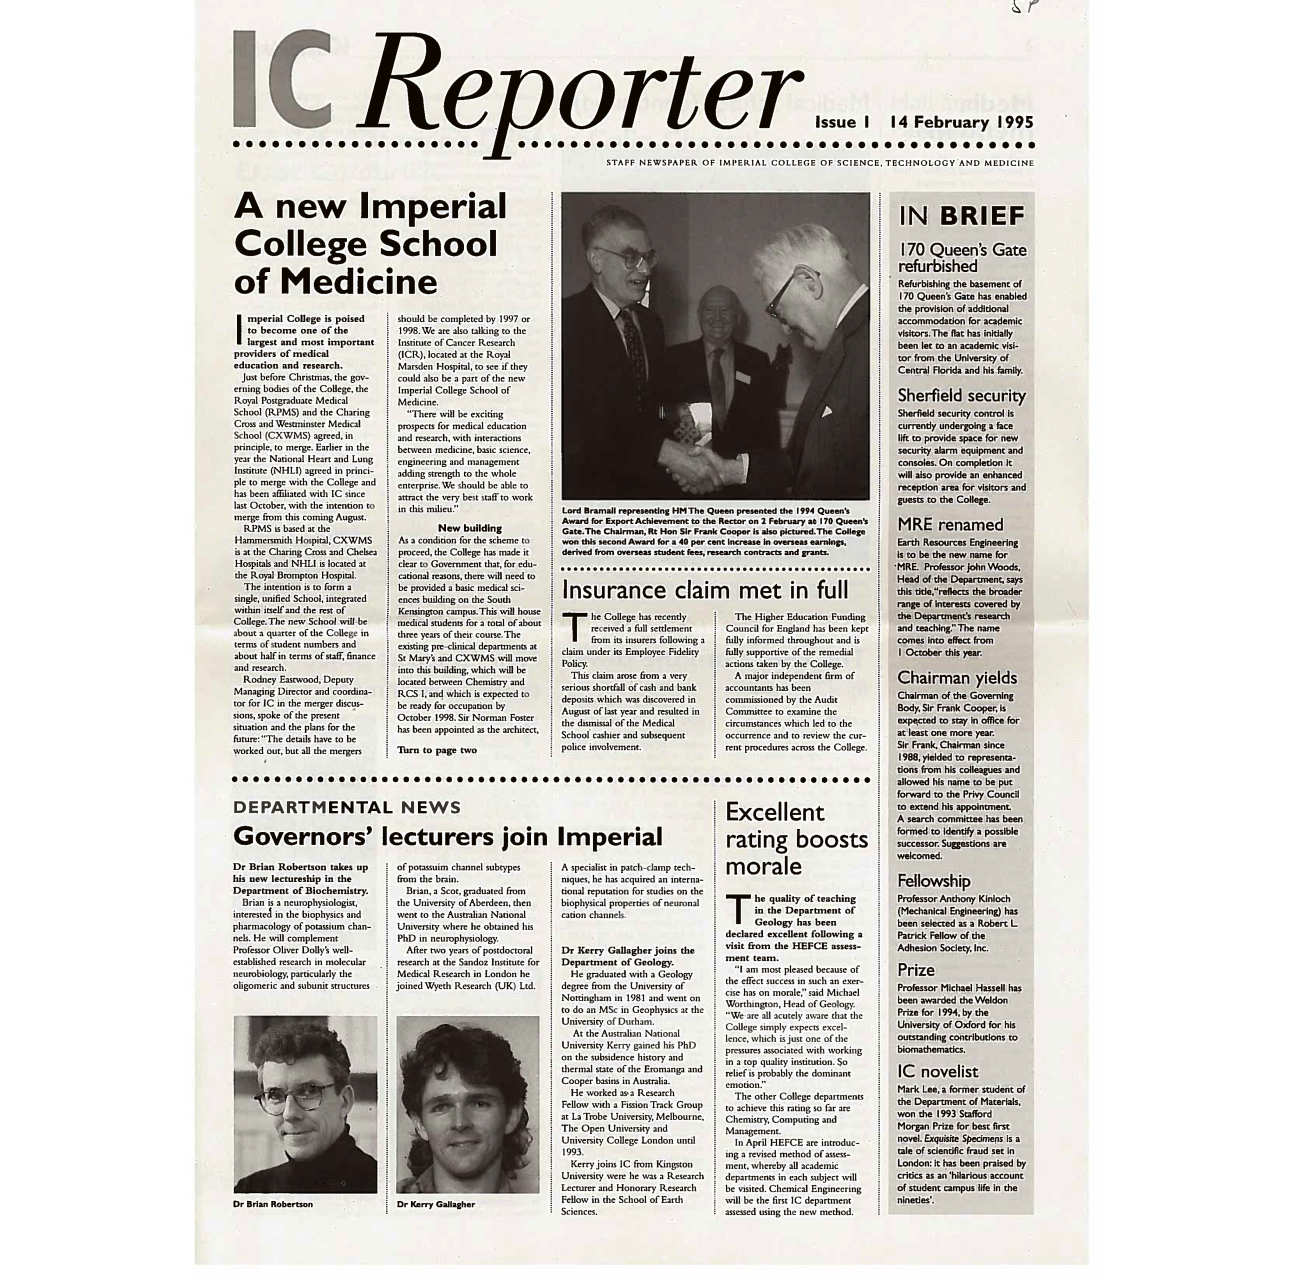 Issue 1, 14 February 1995